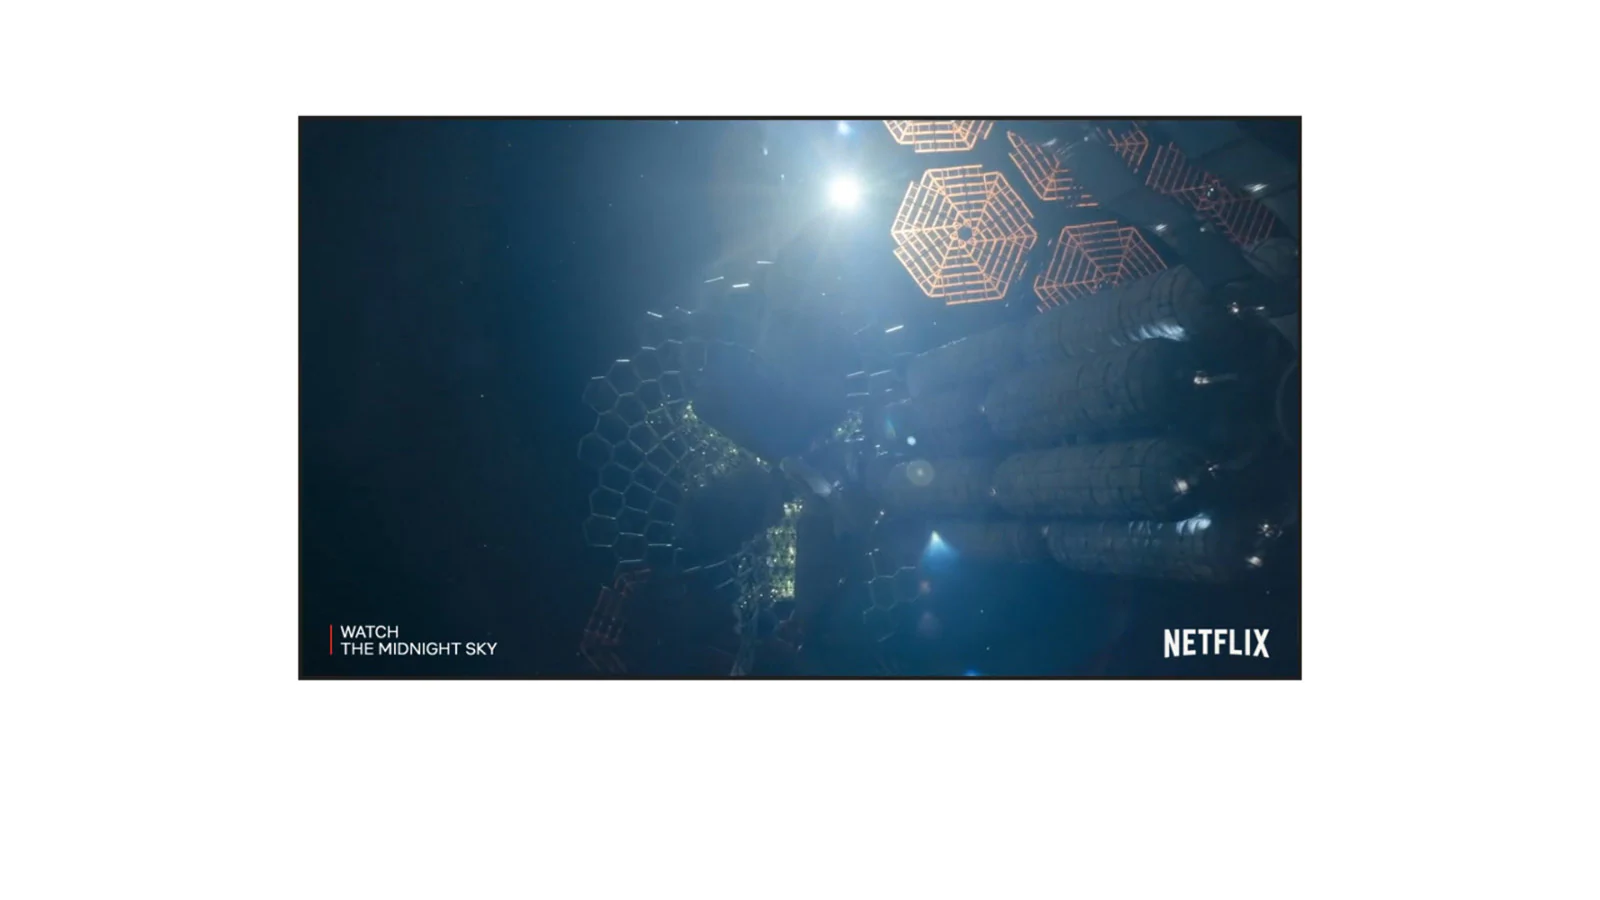 TV screen showing the trailer for The Midnight Sky on Netflix (watching video).